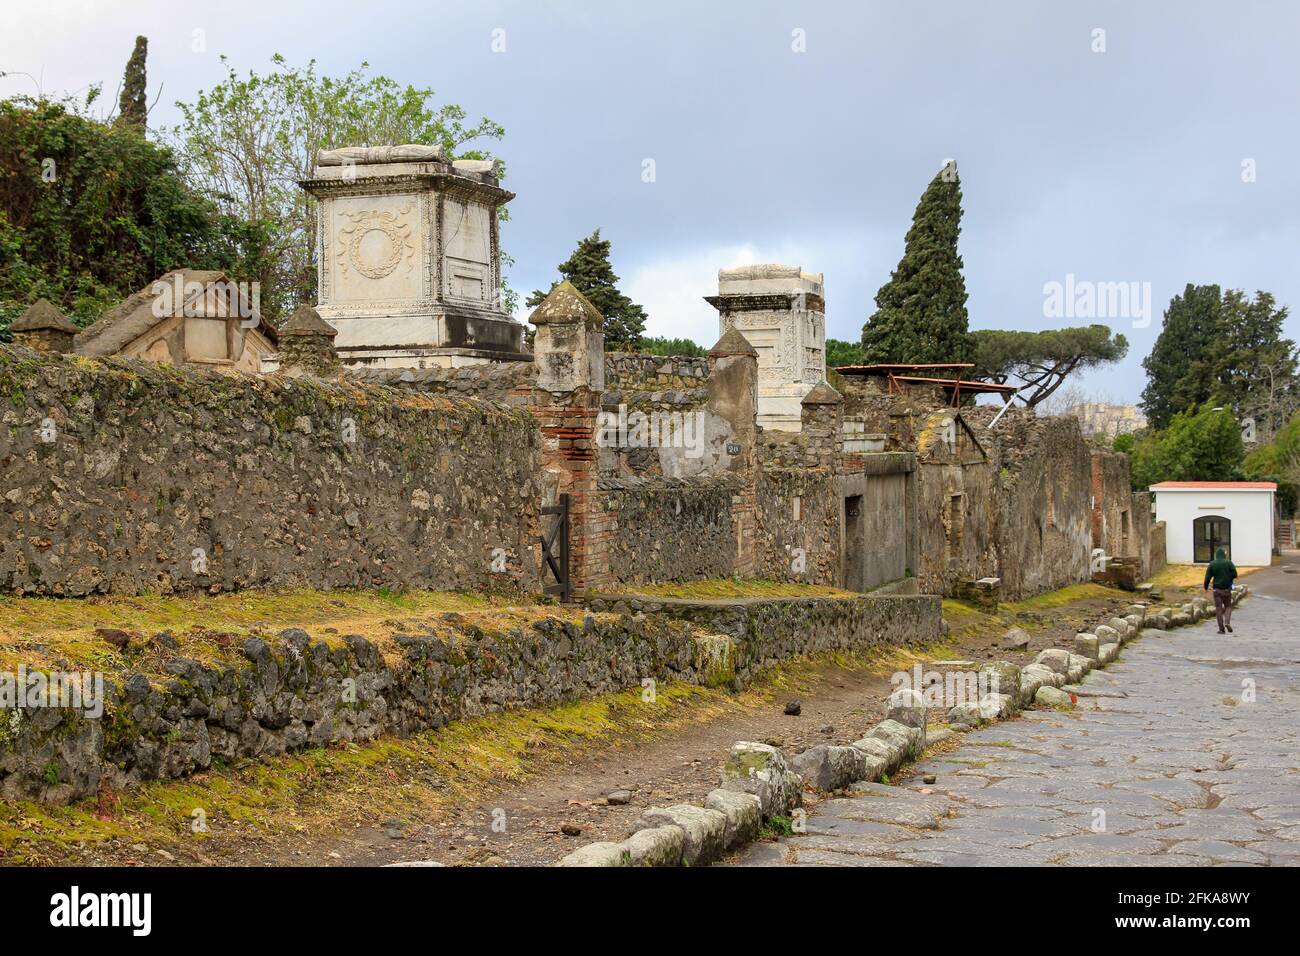 Necropolis with tombs behind stone wall in Pompeii, Italy Stock Photo